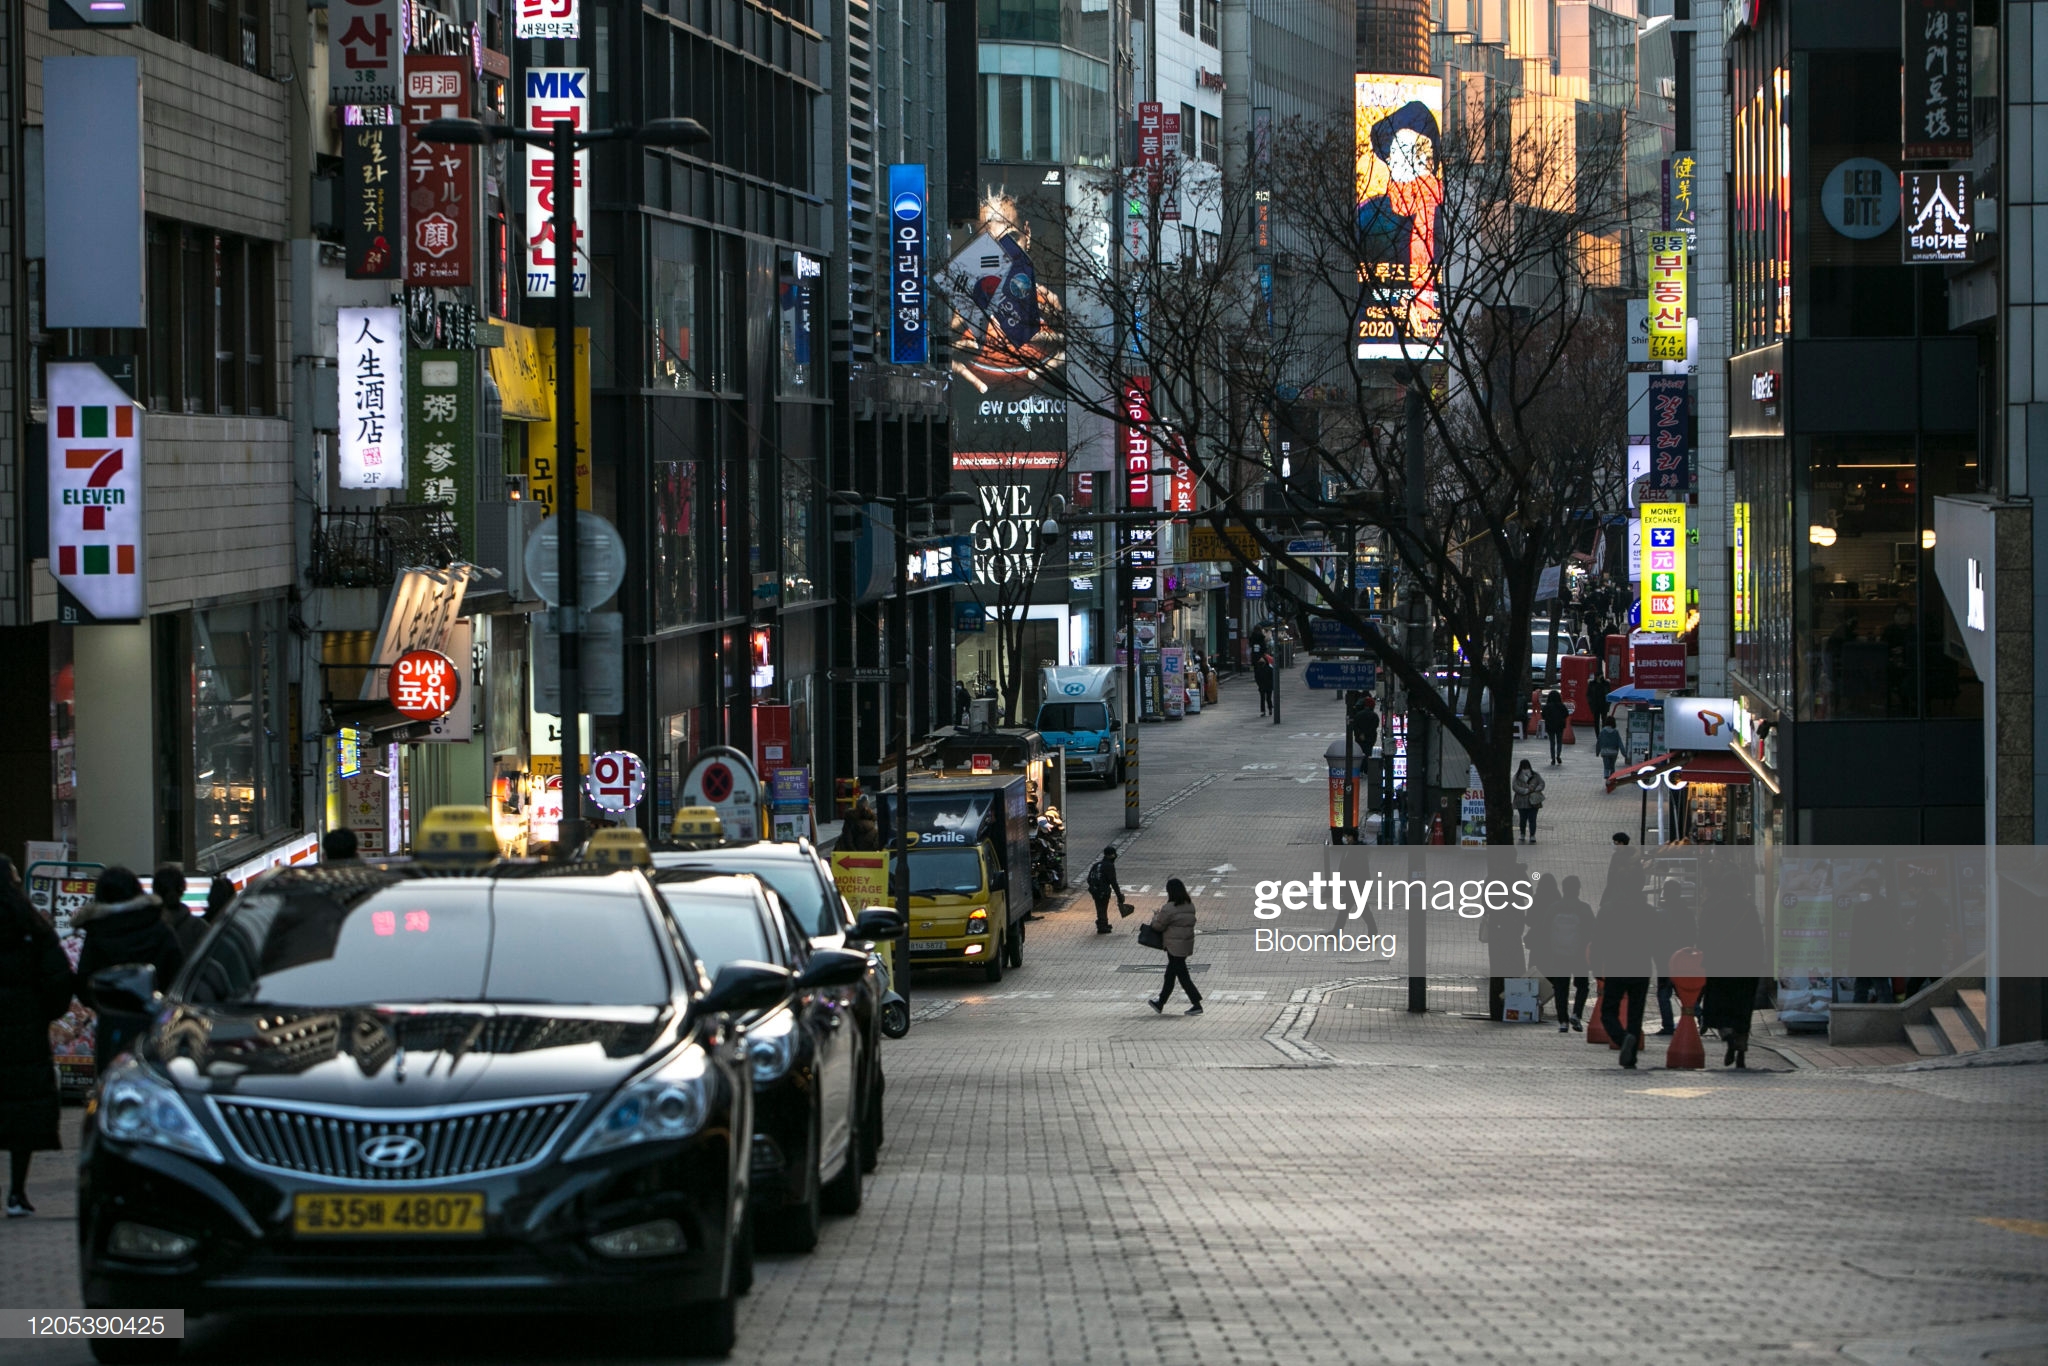 vehicles-sit-parked-on-a-street-in-the-myeongdong-district-in-seoul-picture-id1205390425